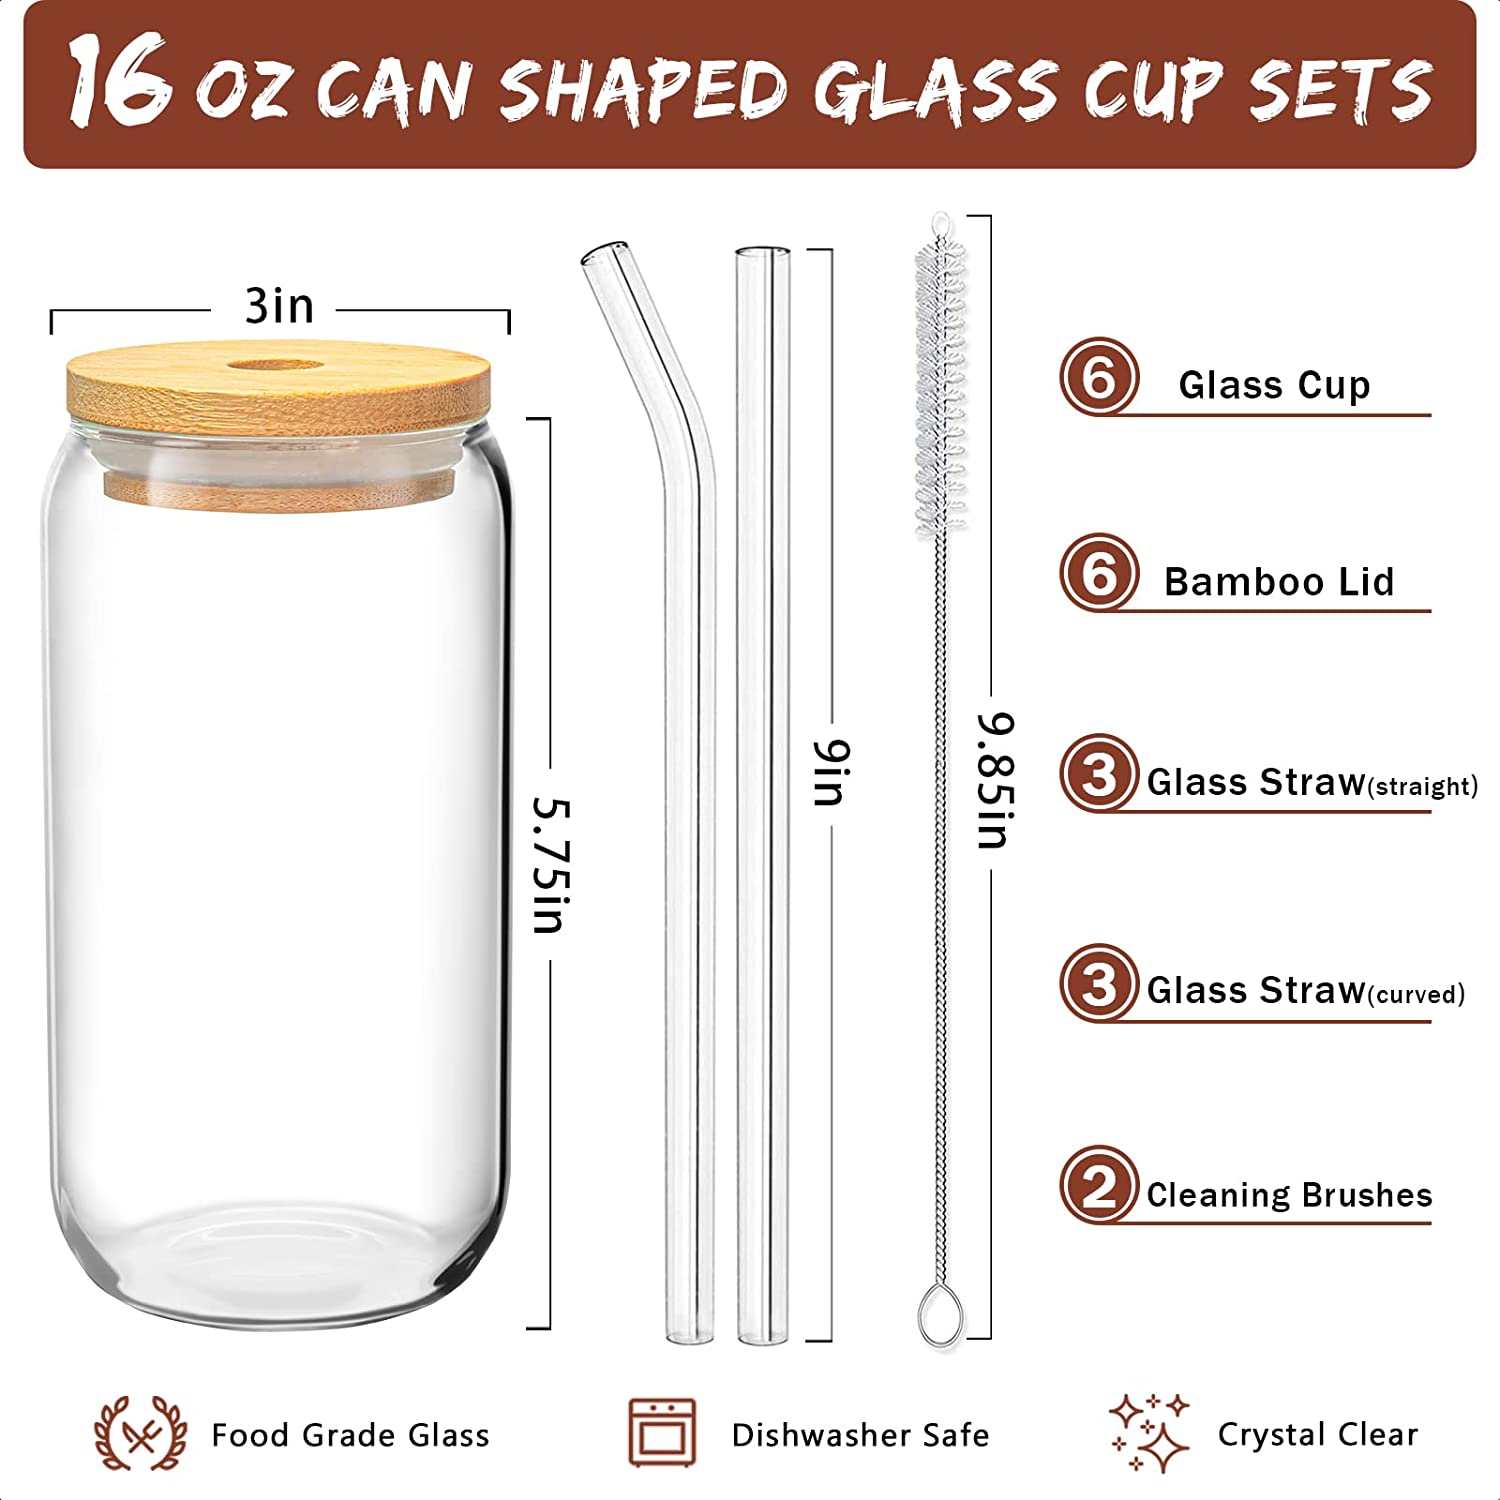 Drinking Glasses With Lid And Glass Straw, Can Shaped Glass Cups